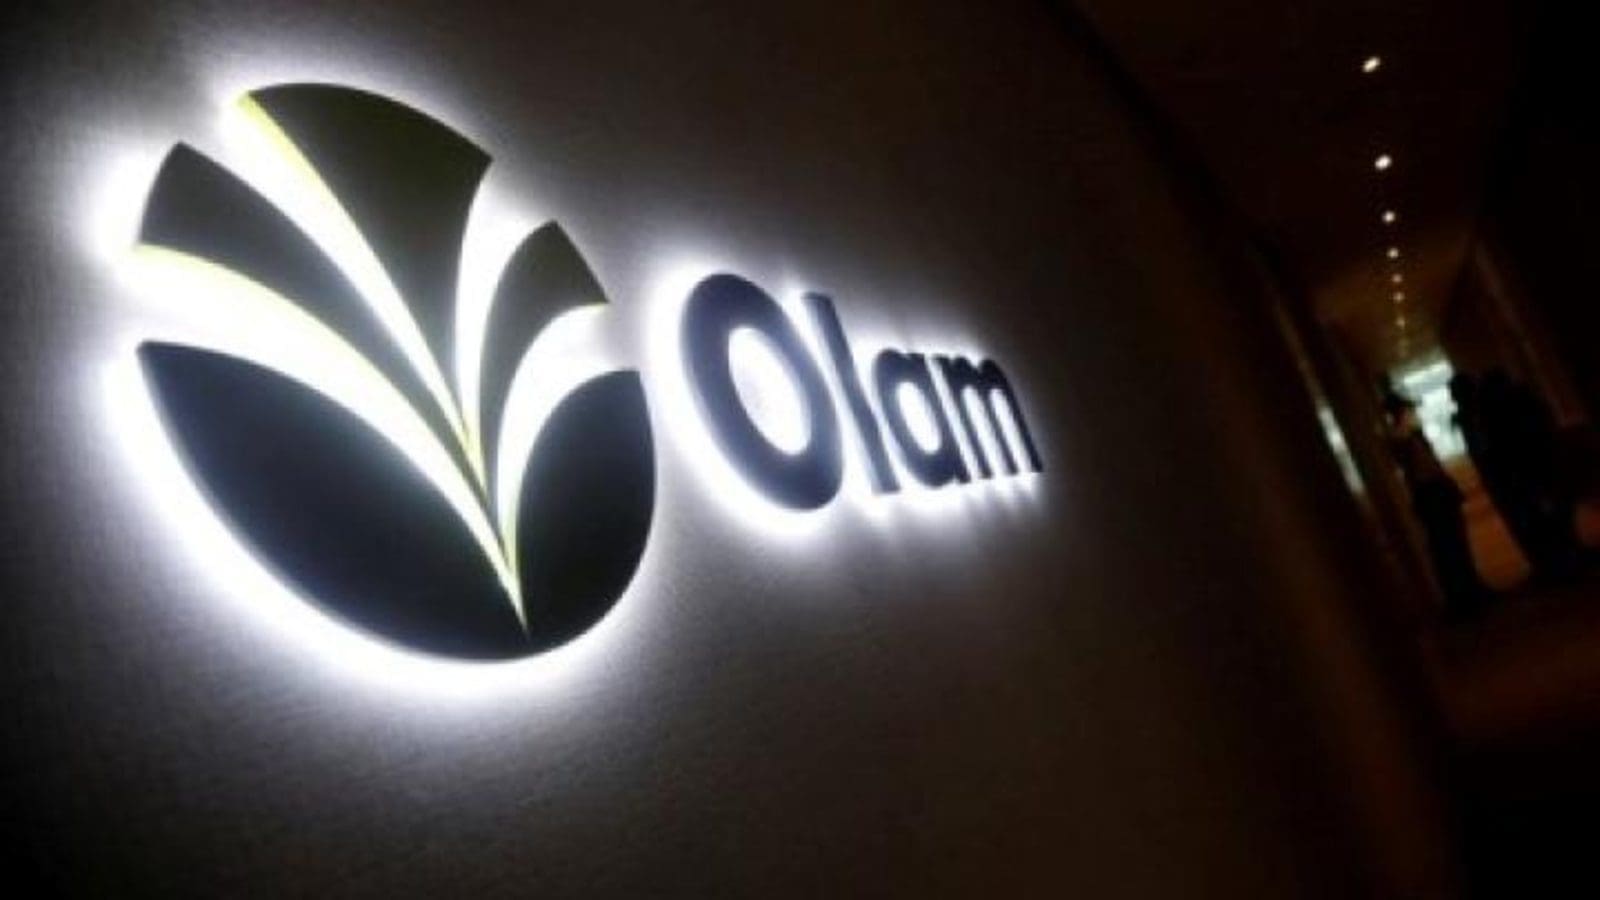 Olam Group appoints Serge François Schoen to chair recently named eight-member Board of Directors